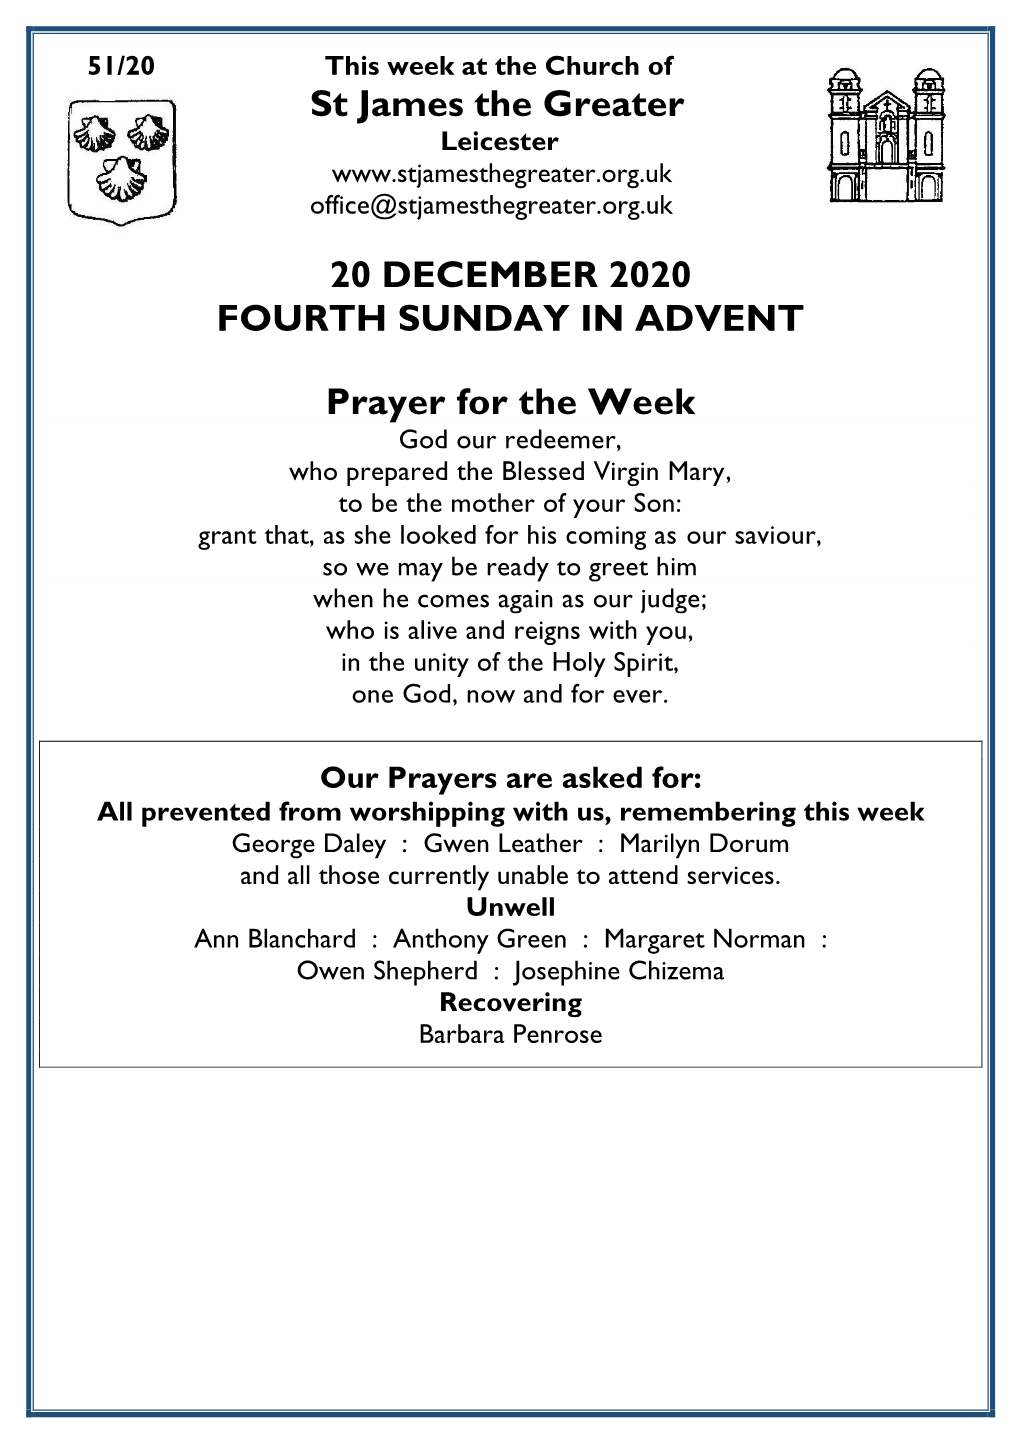 St James the Greater 20 DECEMBER 2020 FOURTH